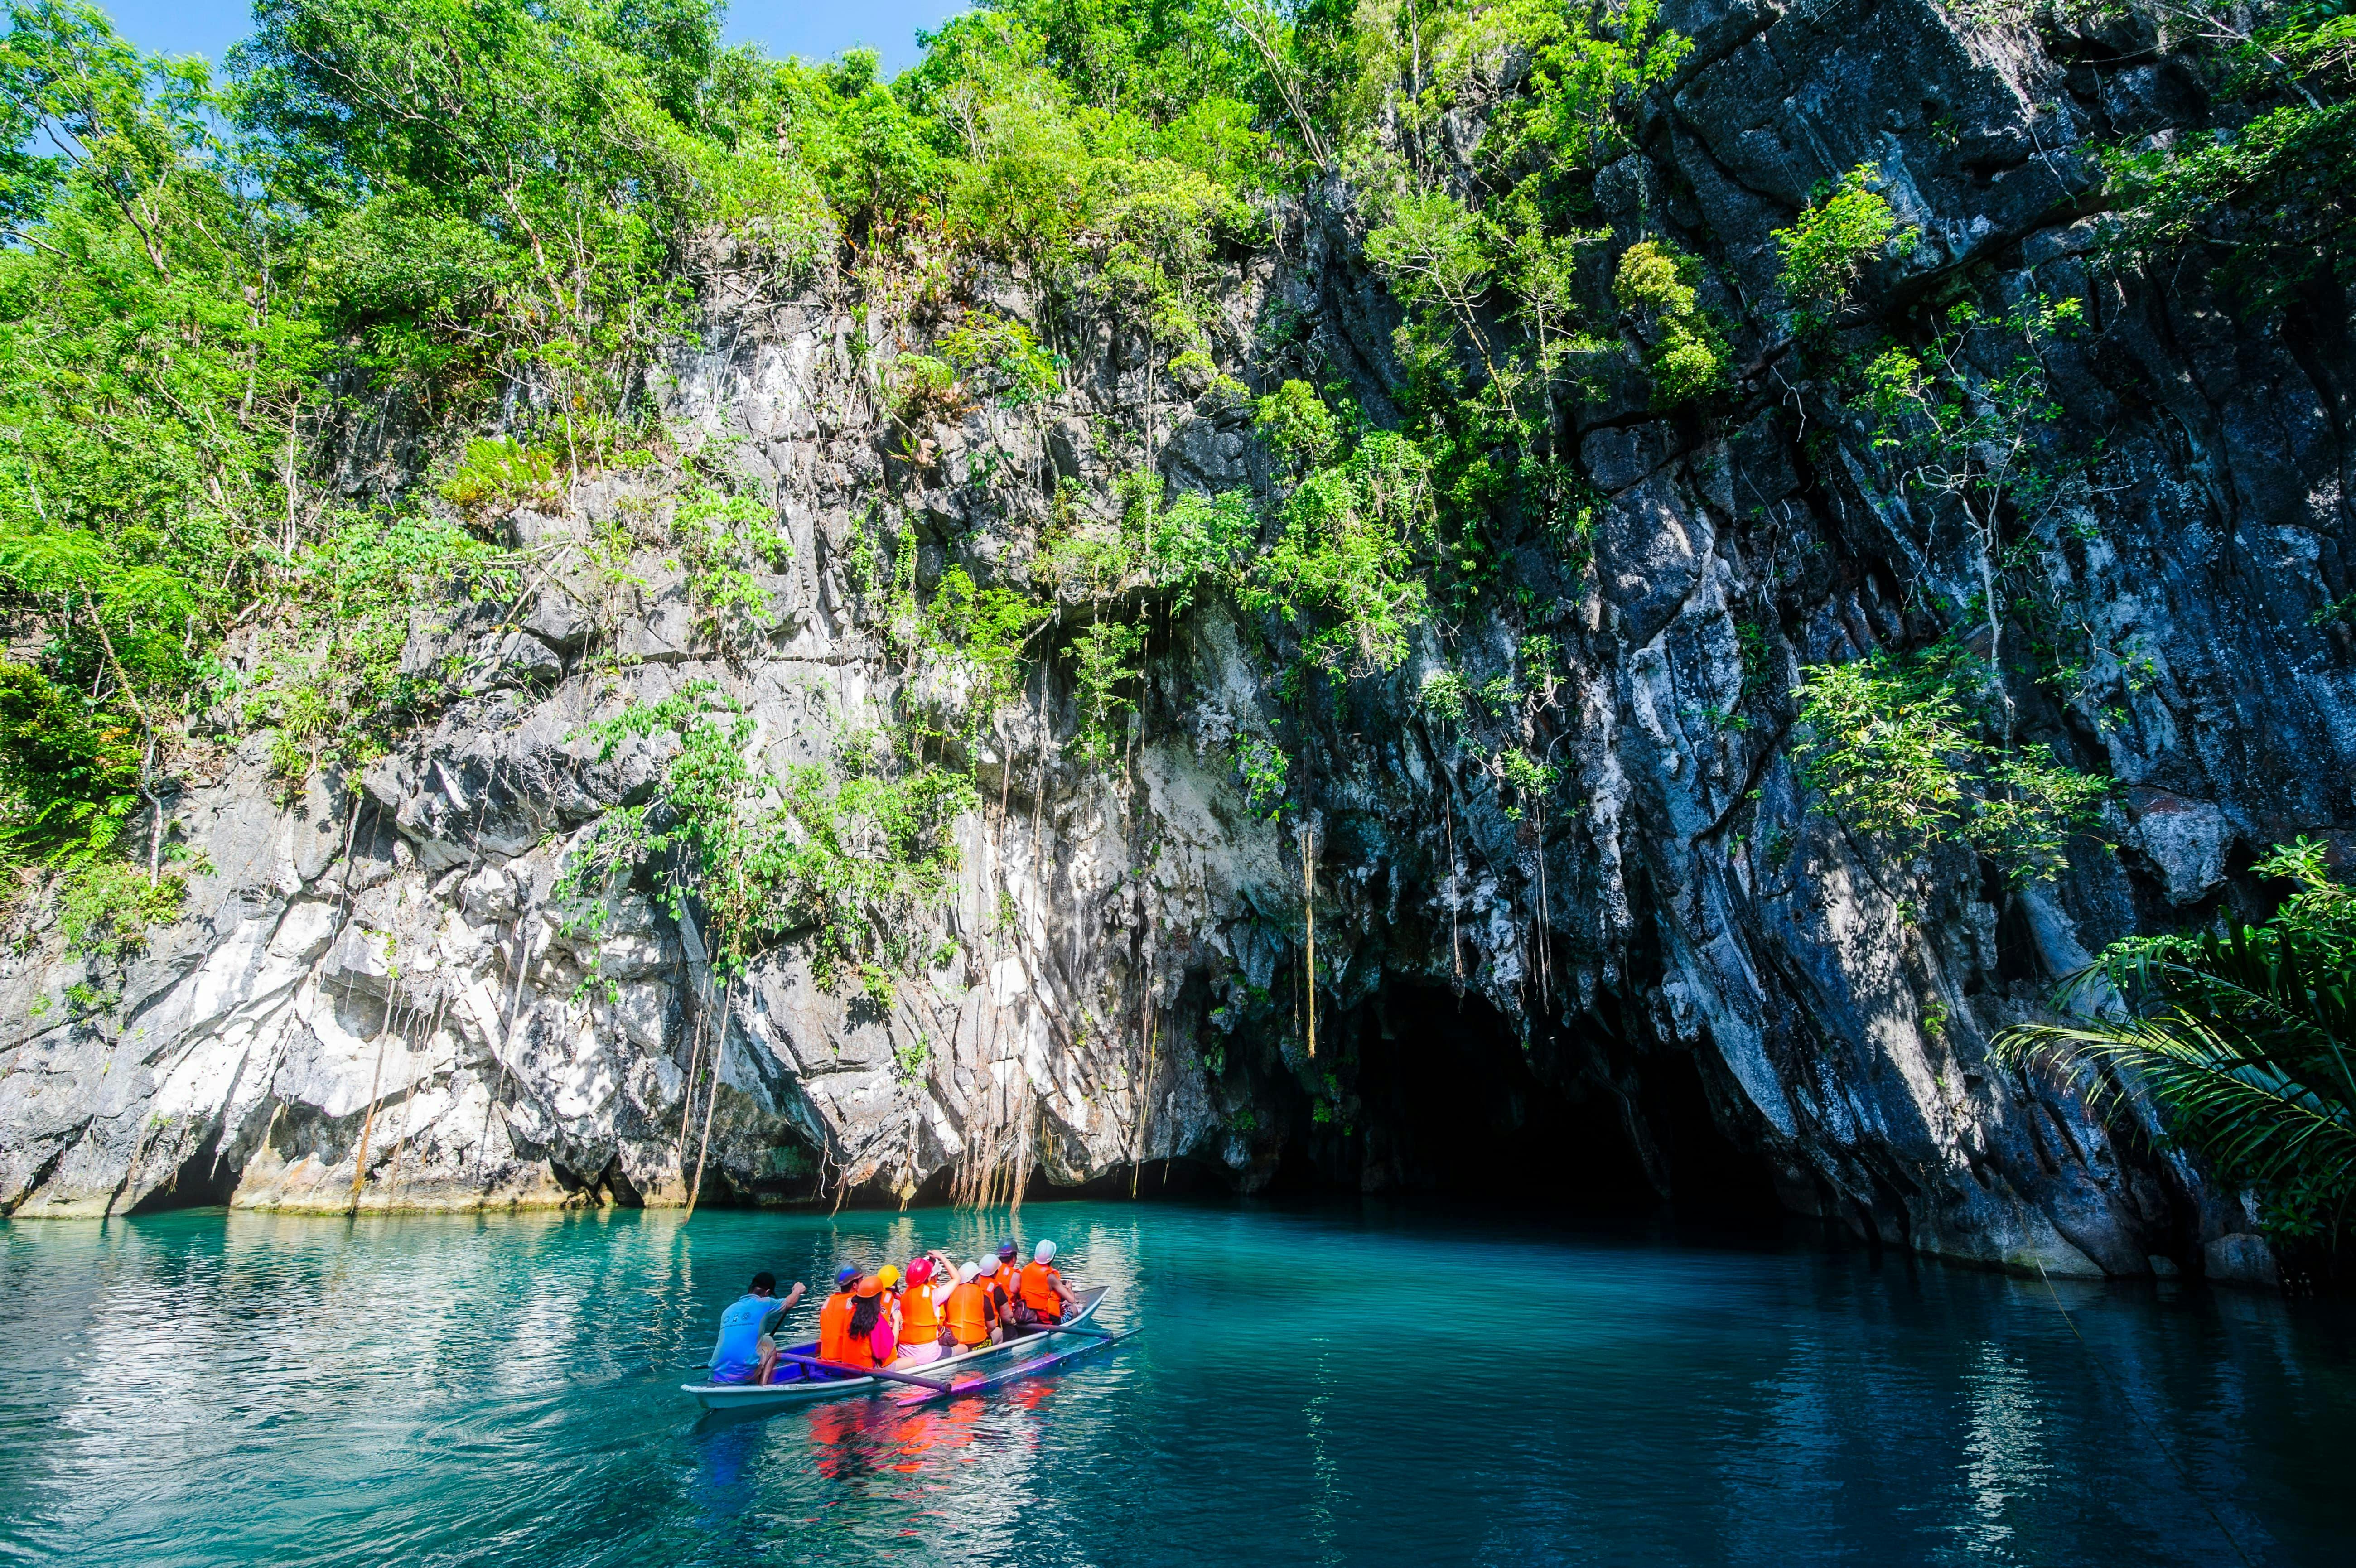 A boat full of travelers about to explore Puerto Princesa Underground River